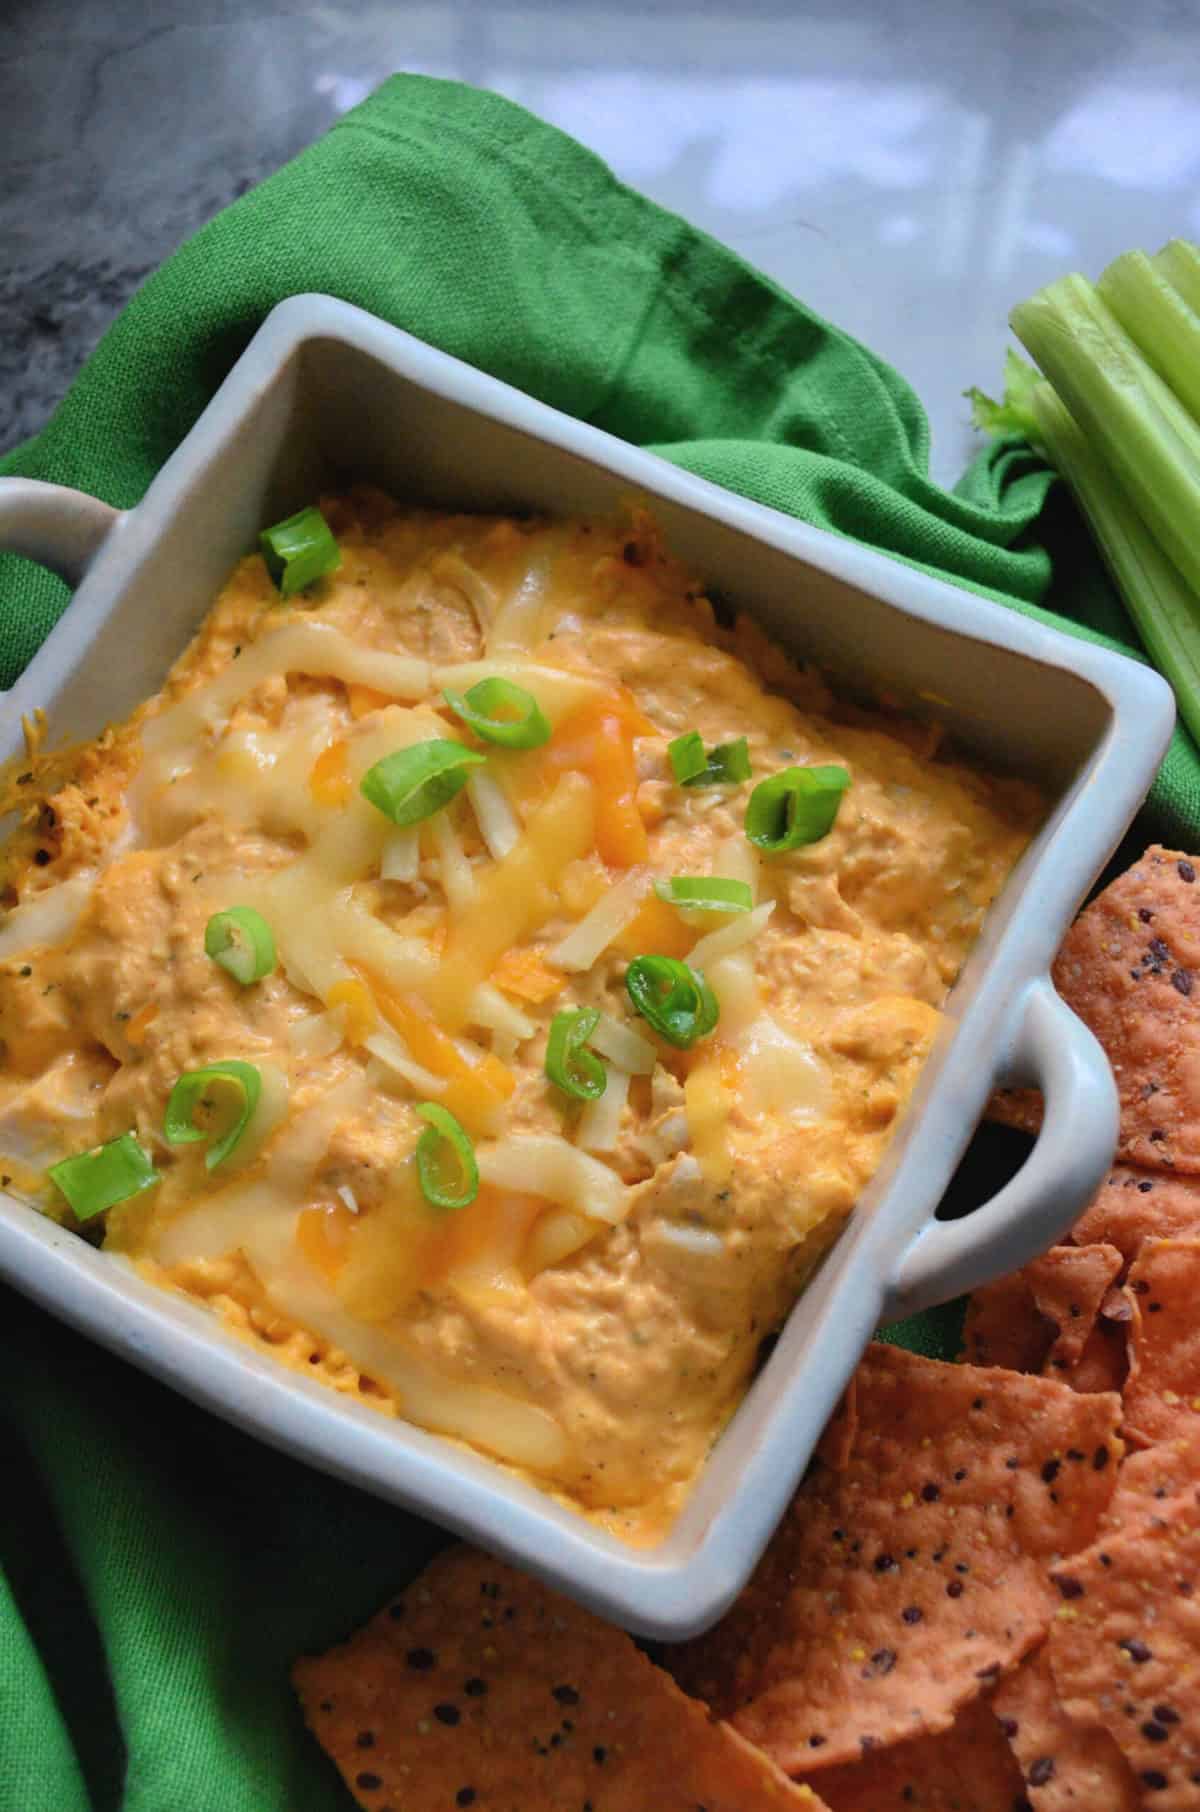 Buffalo chicken dip in a ceramic baking dish served with chips and celery.